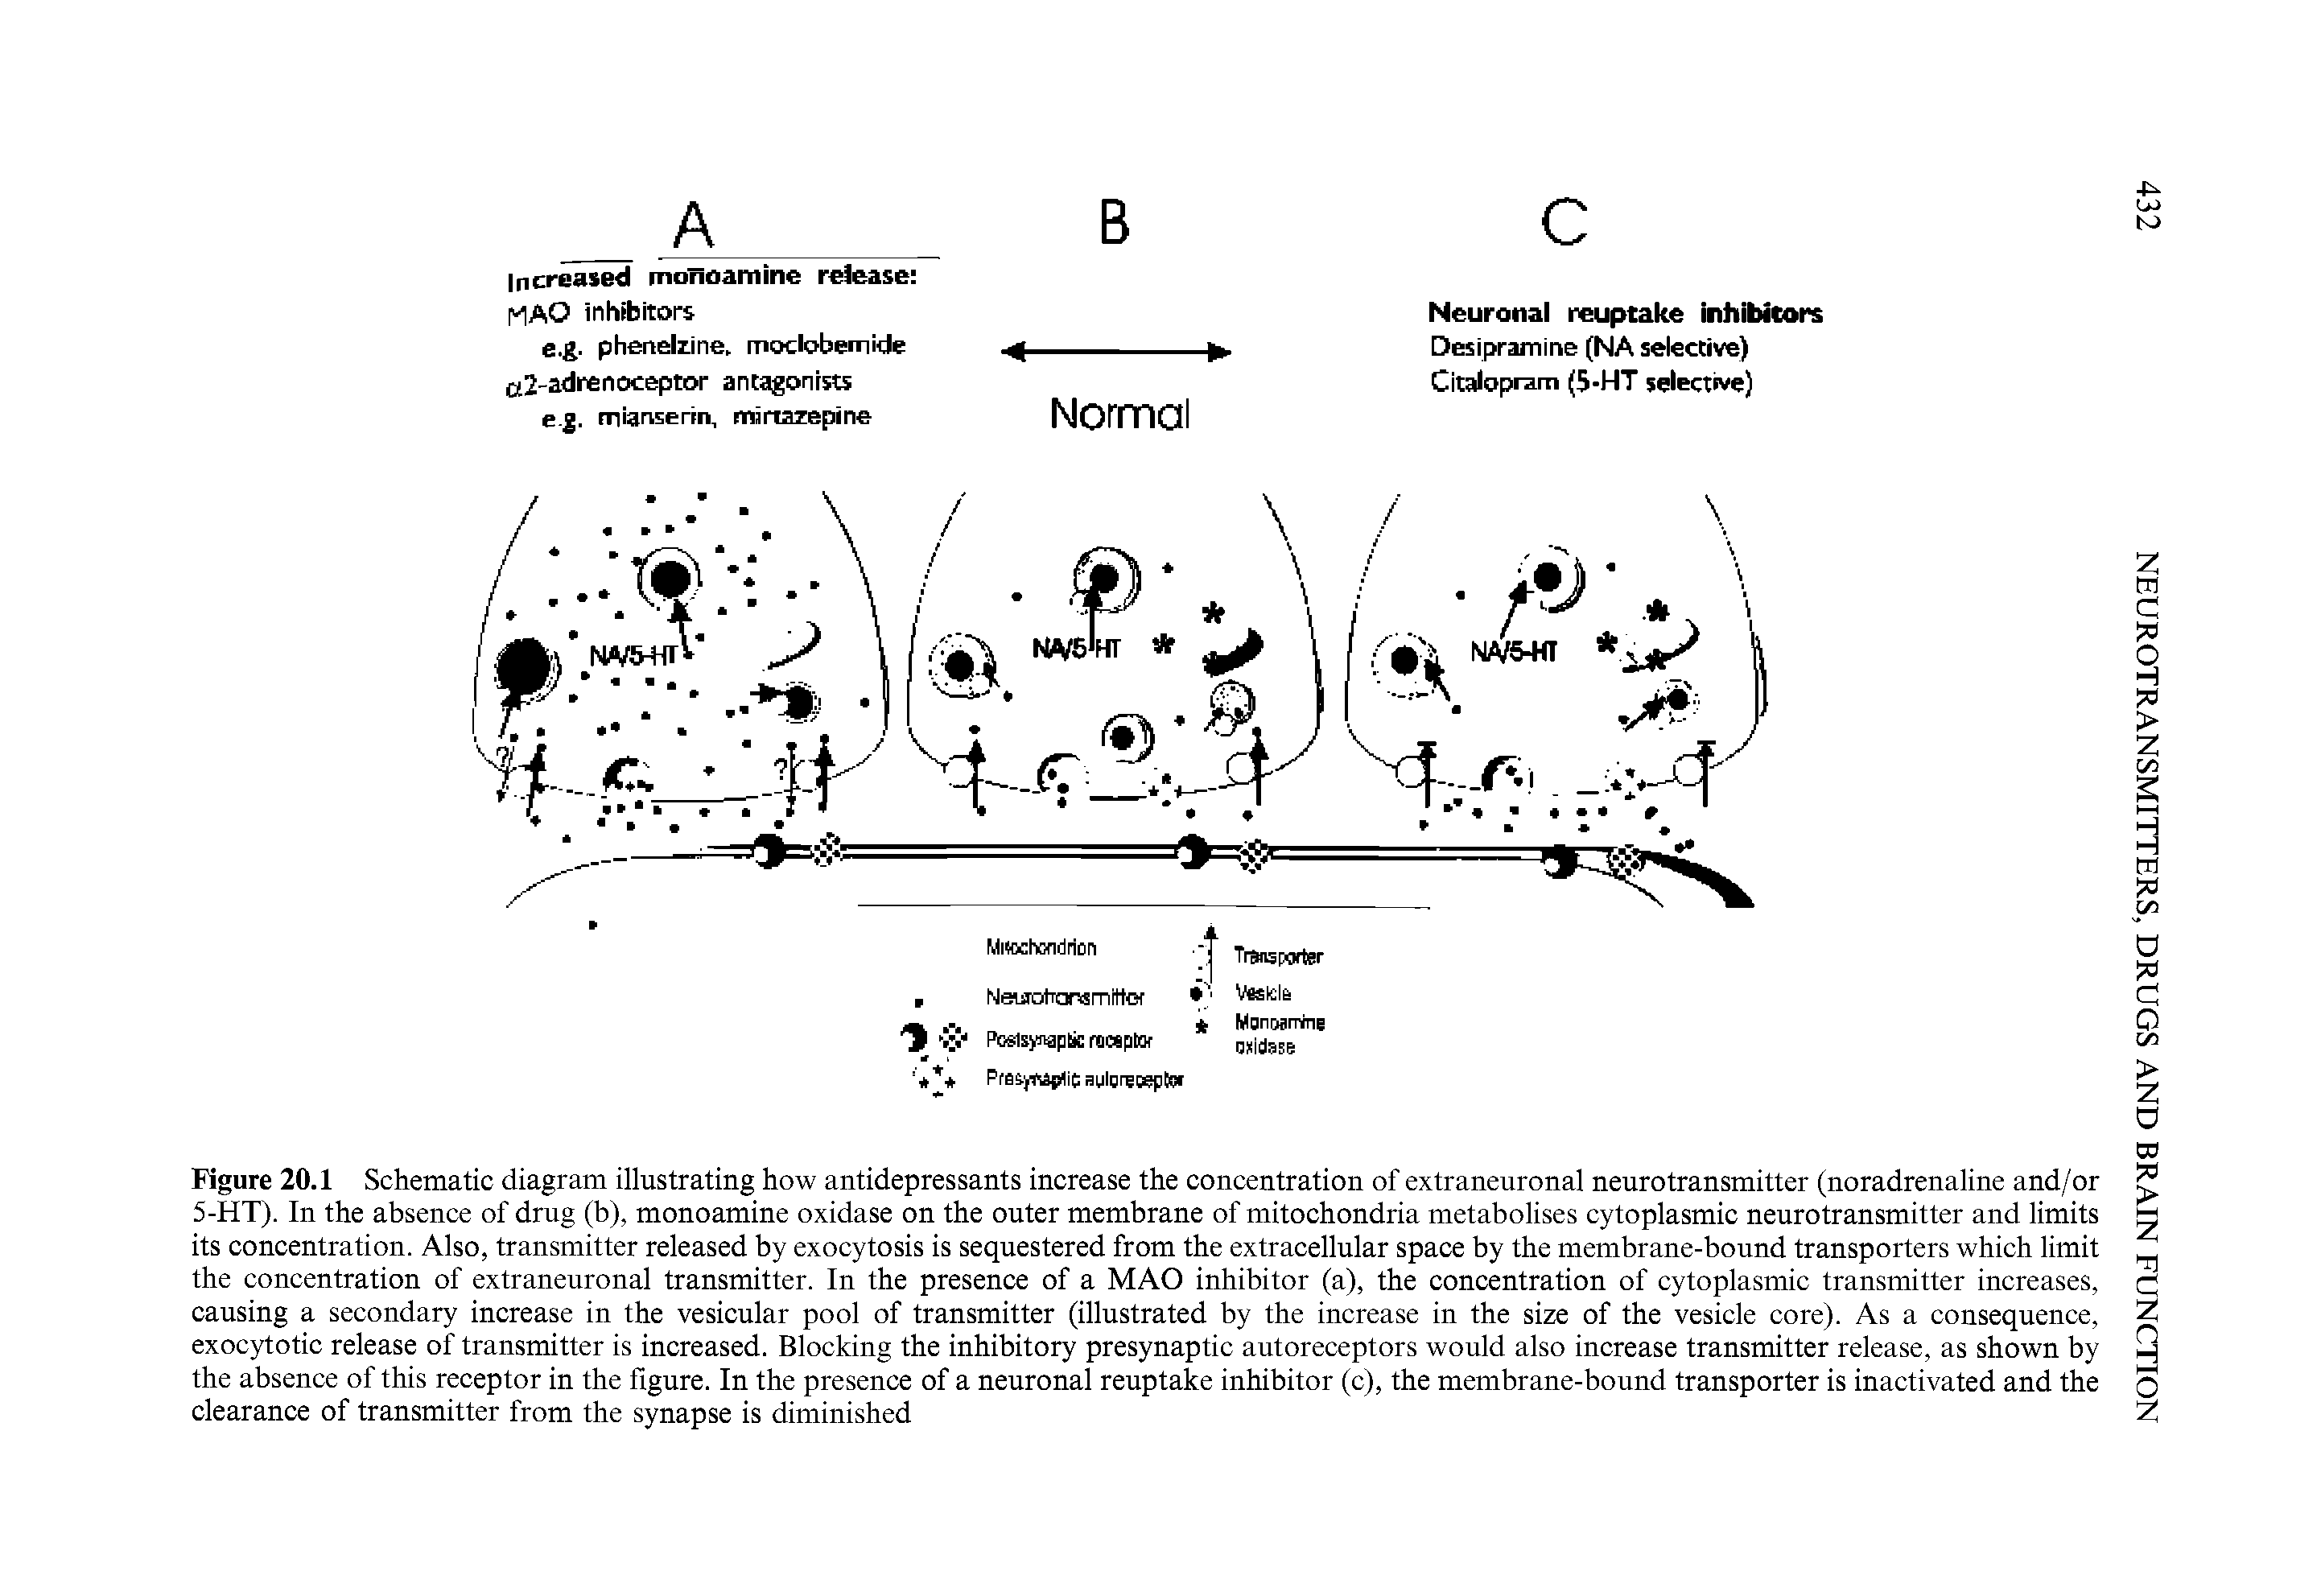 Figure 20.1 Schematic diagram illustrating how antidepressants increase the concentration of extraneuronal neurotransmitter (noradrenaline and/or 5-HT). In the absence of drug (b), monoamine oxidase on the outer membrane of mitochondria metabolises cytoplasmic neurotransmitter and limits its concentration. Also, transmitter released by exocytosis is sequestered from the extracellular space by the membrane-bound transporters which limit the concentration of extraneuronal transmitter. In the presence of a MAO inhibitor (a), the concentration of cytoplasmic transmitter increases, causing a secondary increase in the vesicular pool of transmitter (illustrated by the increase in the size of the vesicle core). As a consequence, exocytotic release of transmitter is increased. Blocking the inhibitory presynaptic autoreceptors would also increase transmitter release, as shown by the absence of this receptor in the figure. In the presence of a neuronal reuptake inhibitor (c), the membrane-bound transporter is inactivated and the clearance of transmitter from the synapse is diminished...